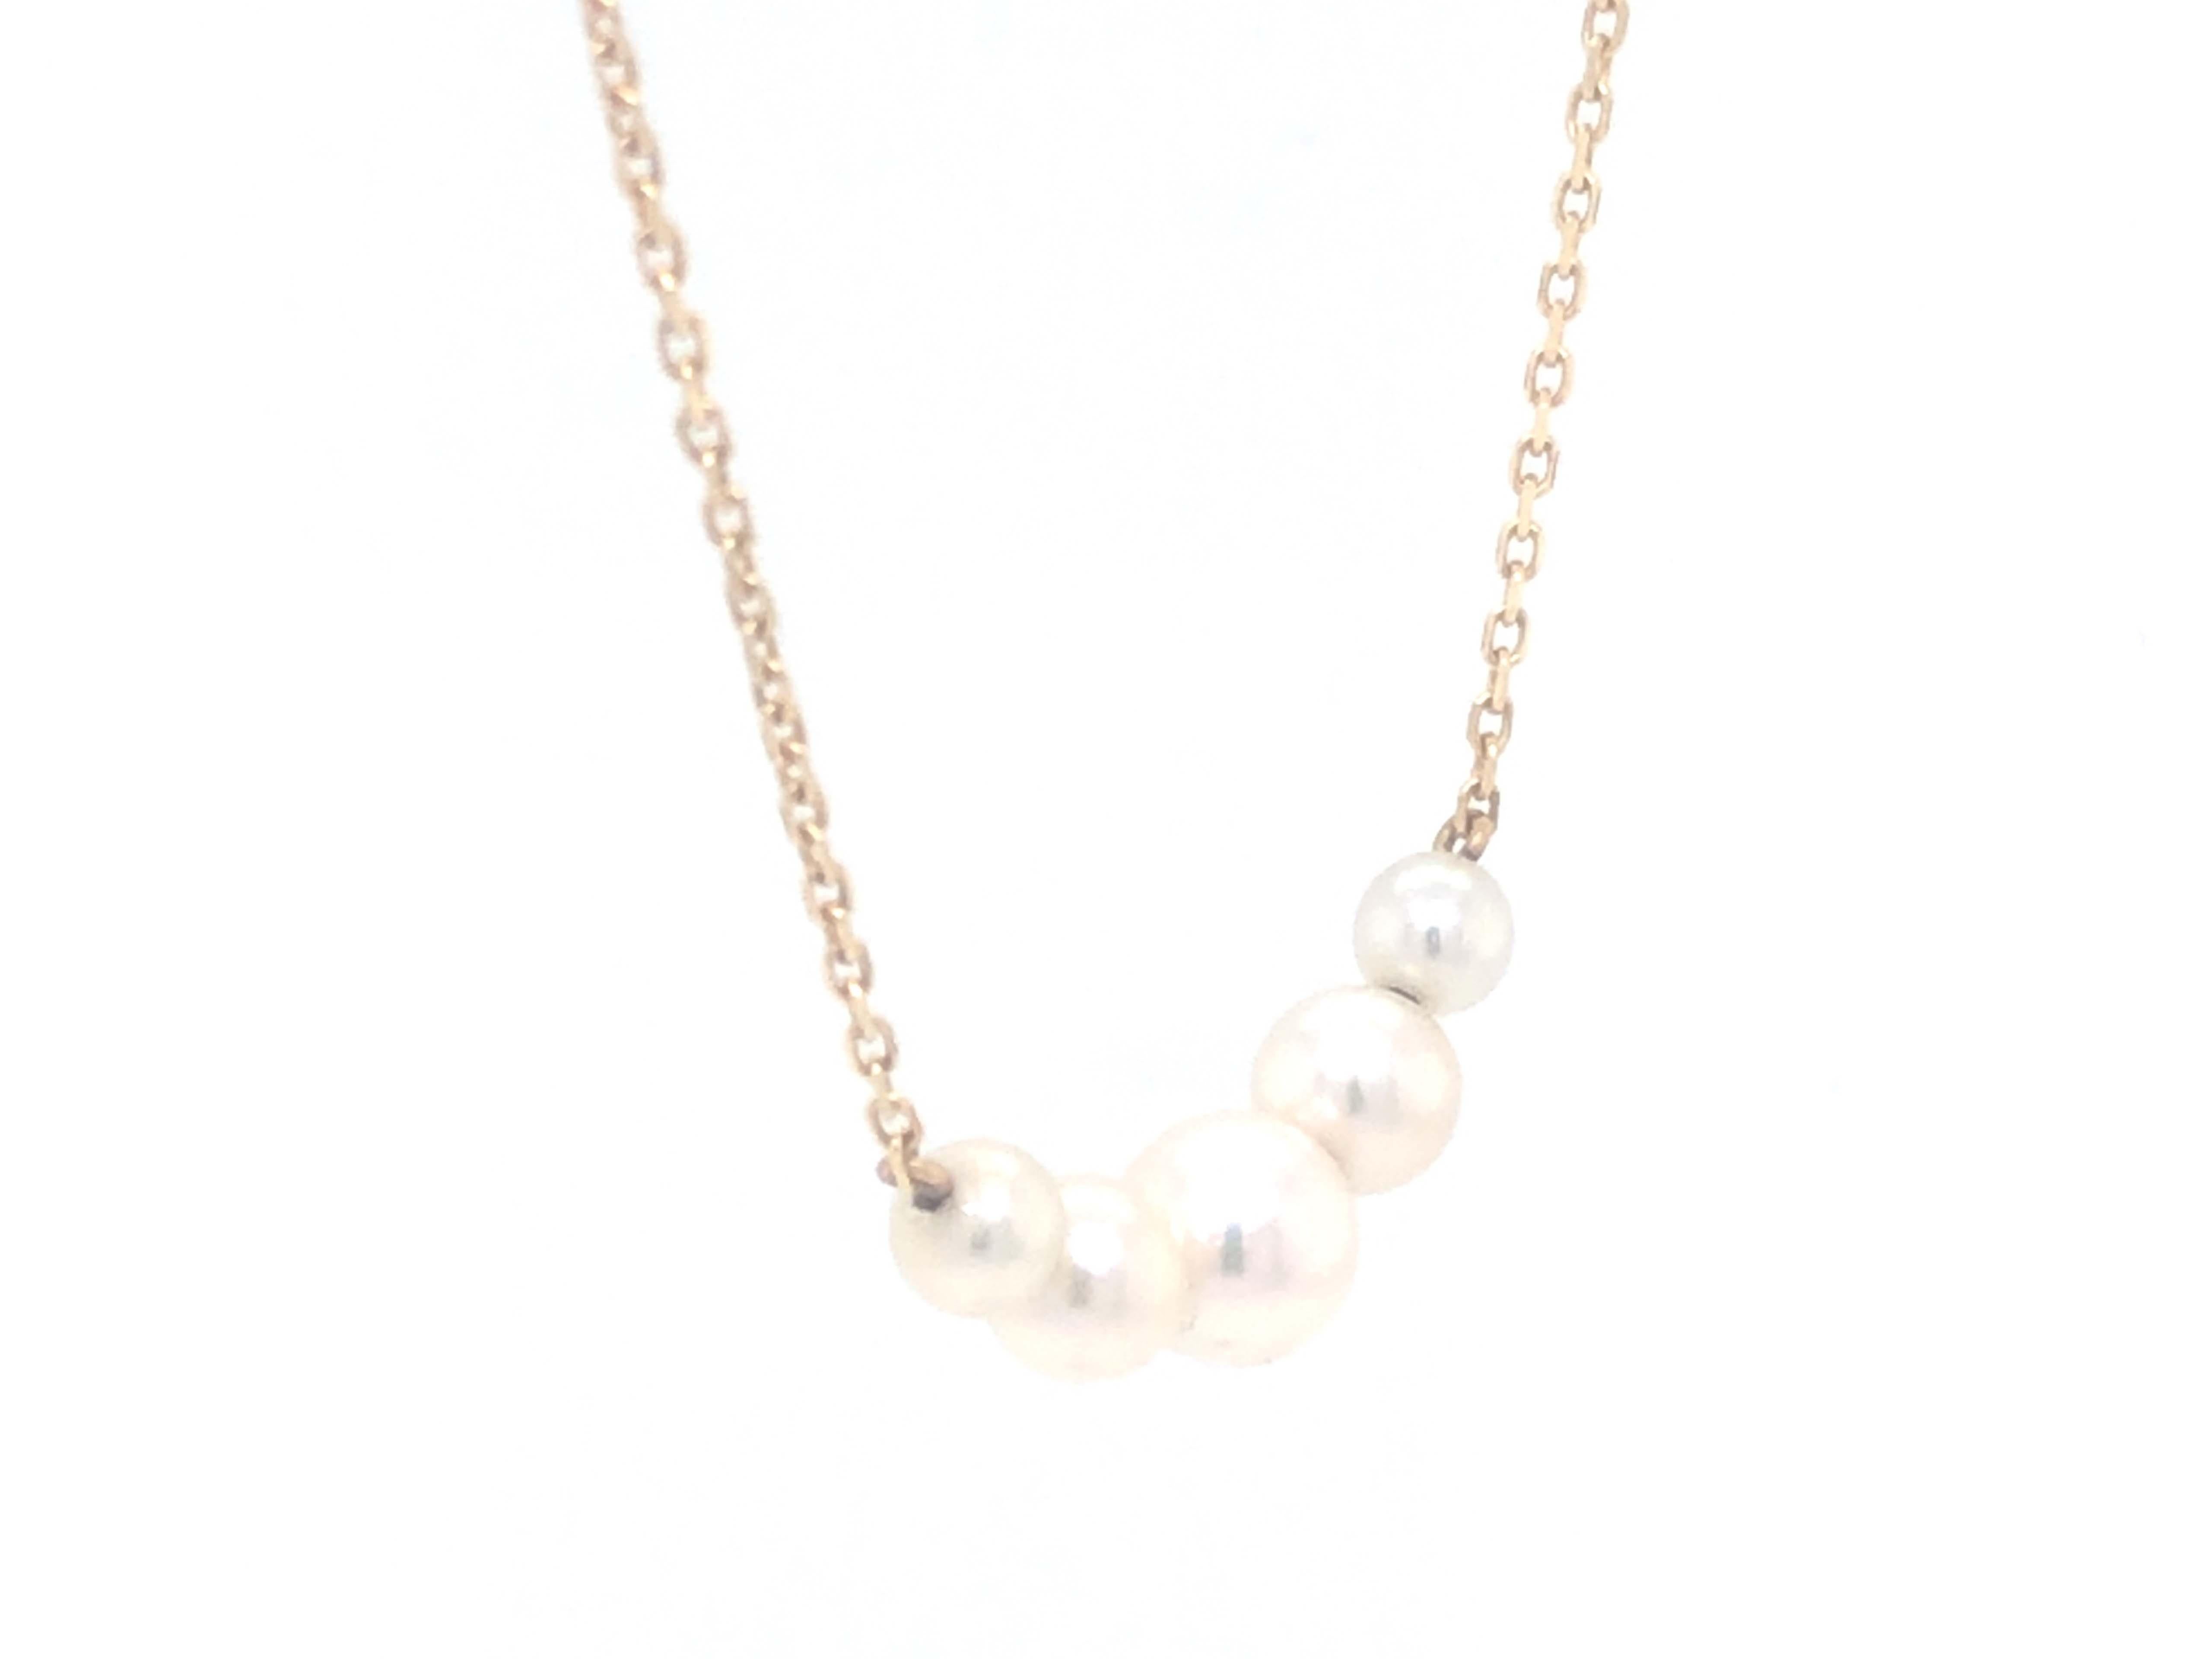 Round Cut Mikimoto 5 Pearl Necklace in 14k Yellow Gold